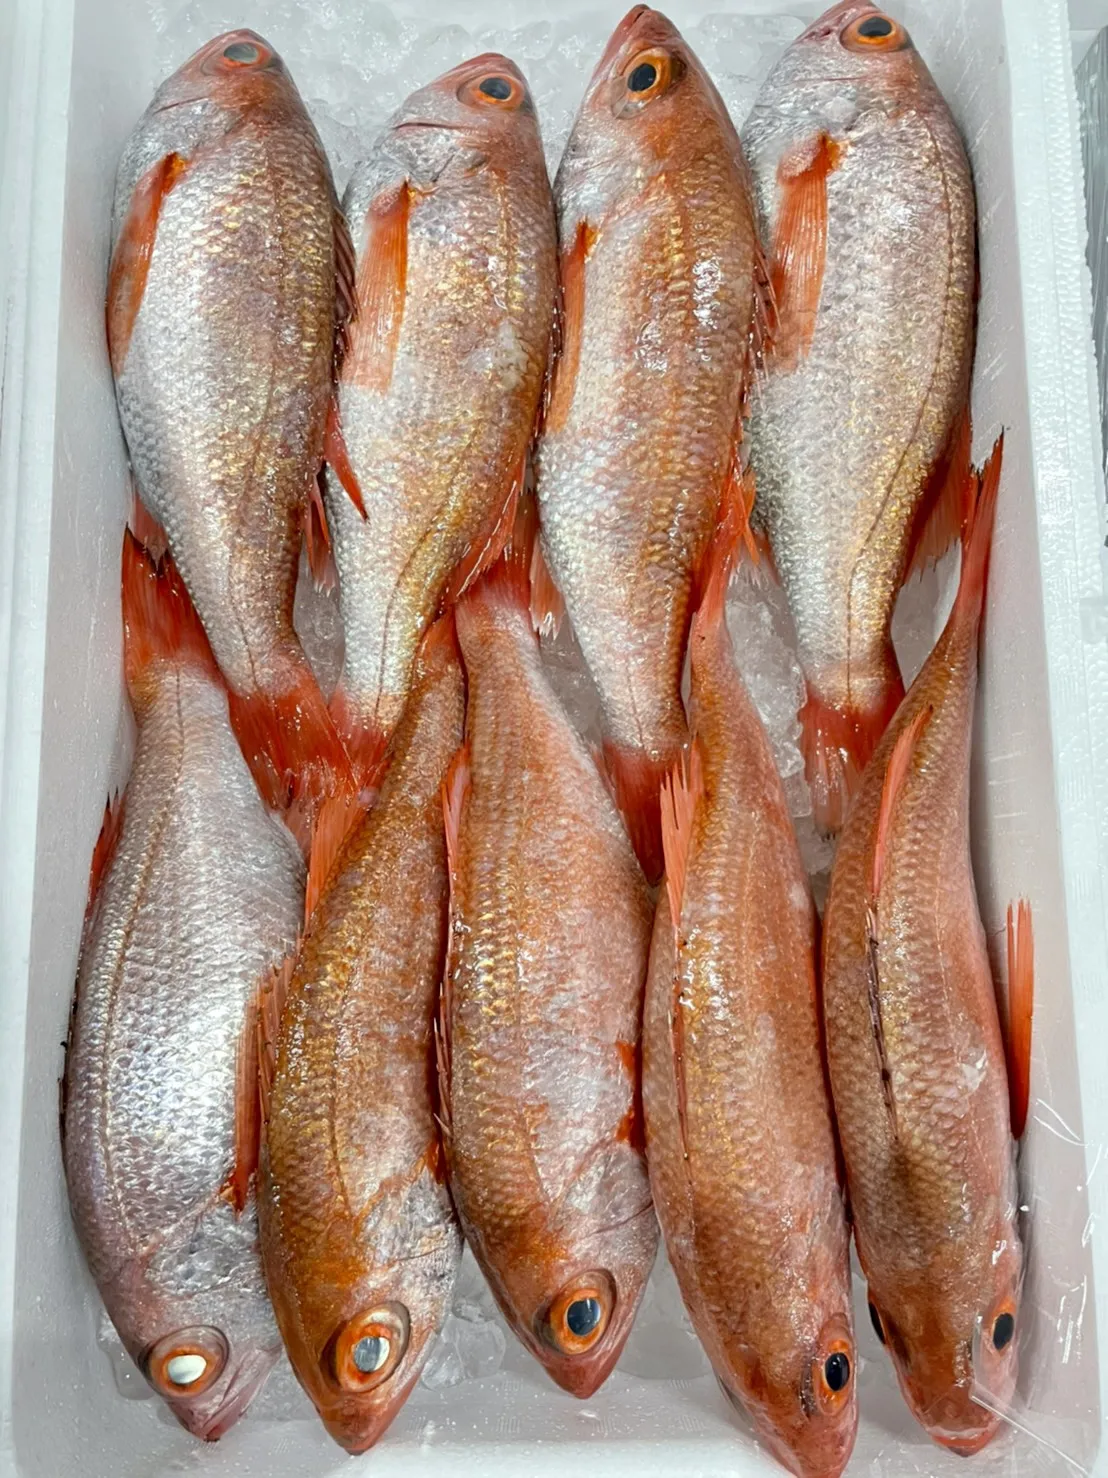 Famous Carefully Select Highest Quality Fat Fresh Fish Seafood Buy Fresh Seafood Fish Seafood Fresh Fish Seafood Product On Alibaba Com